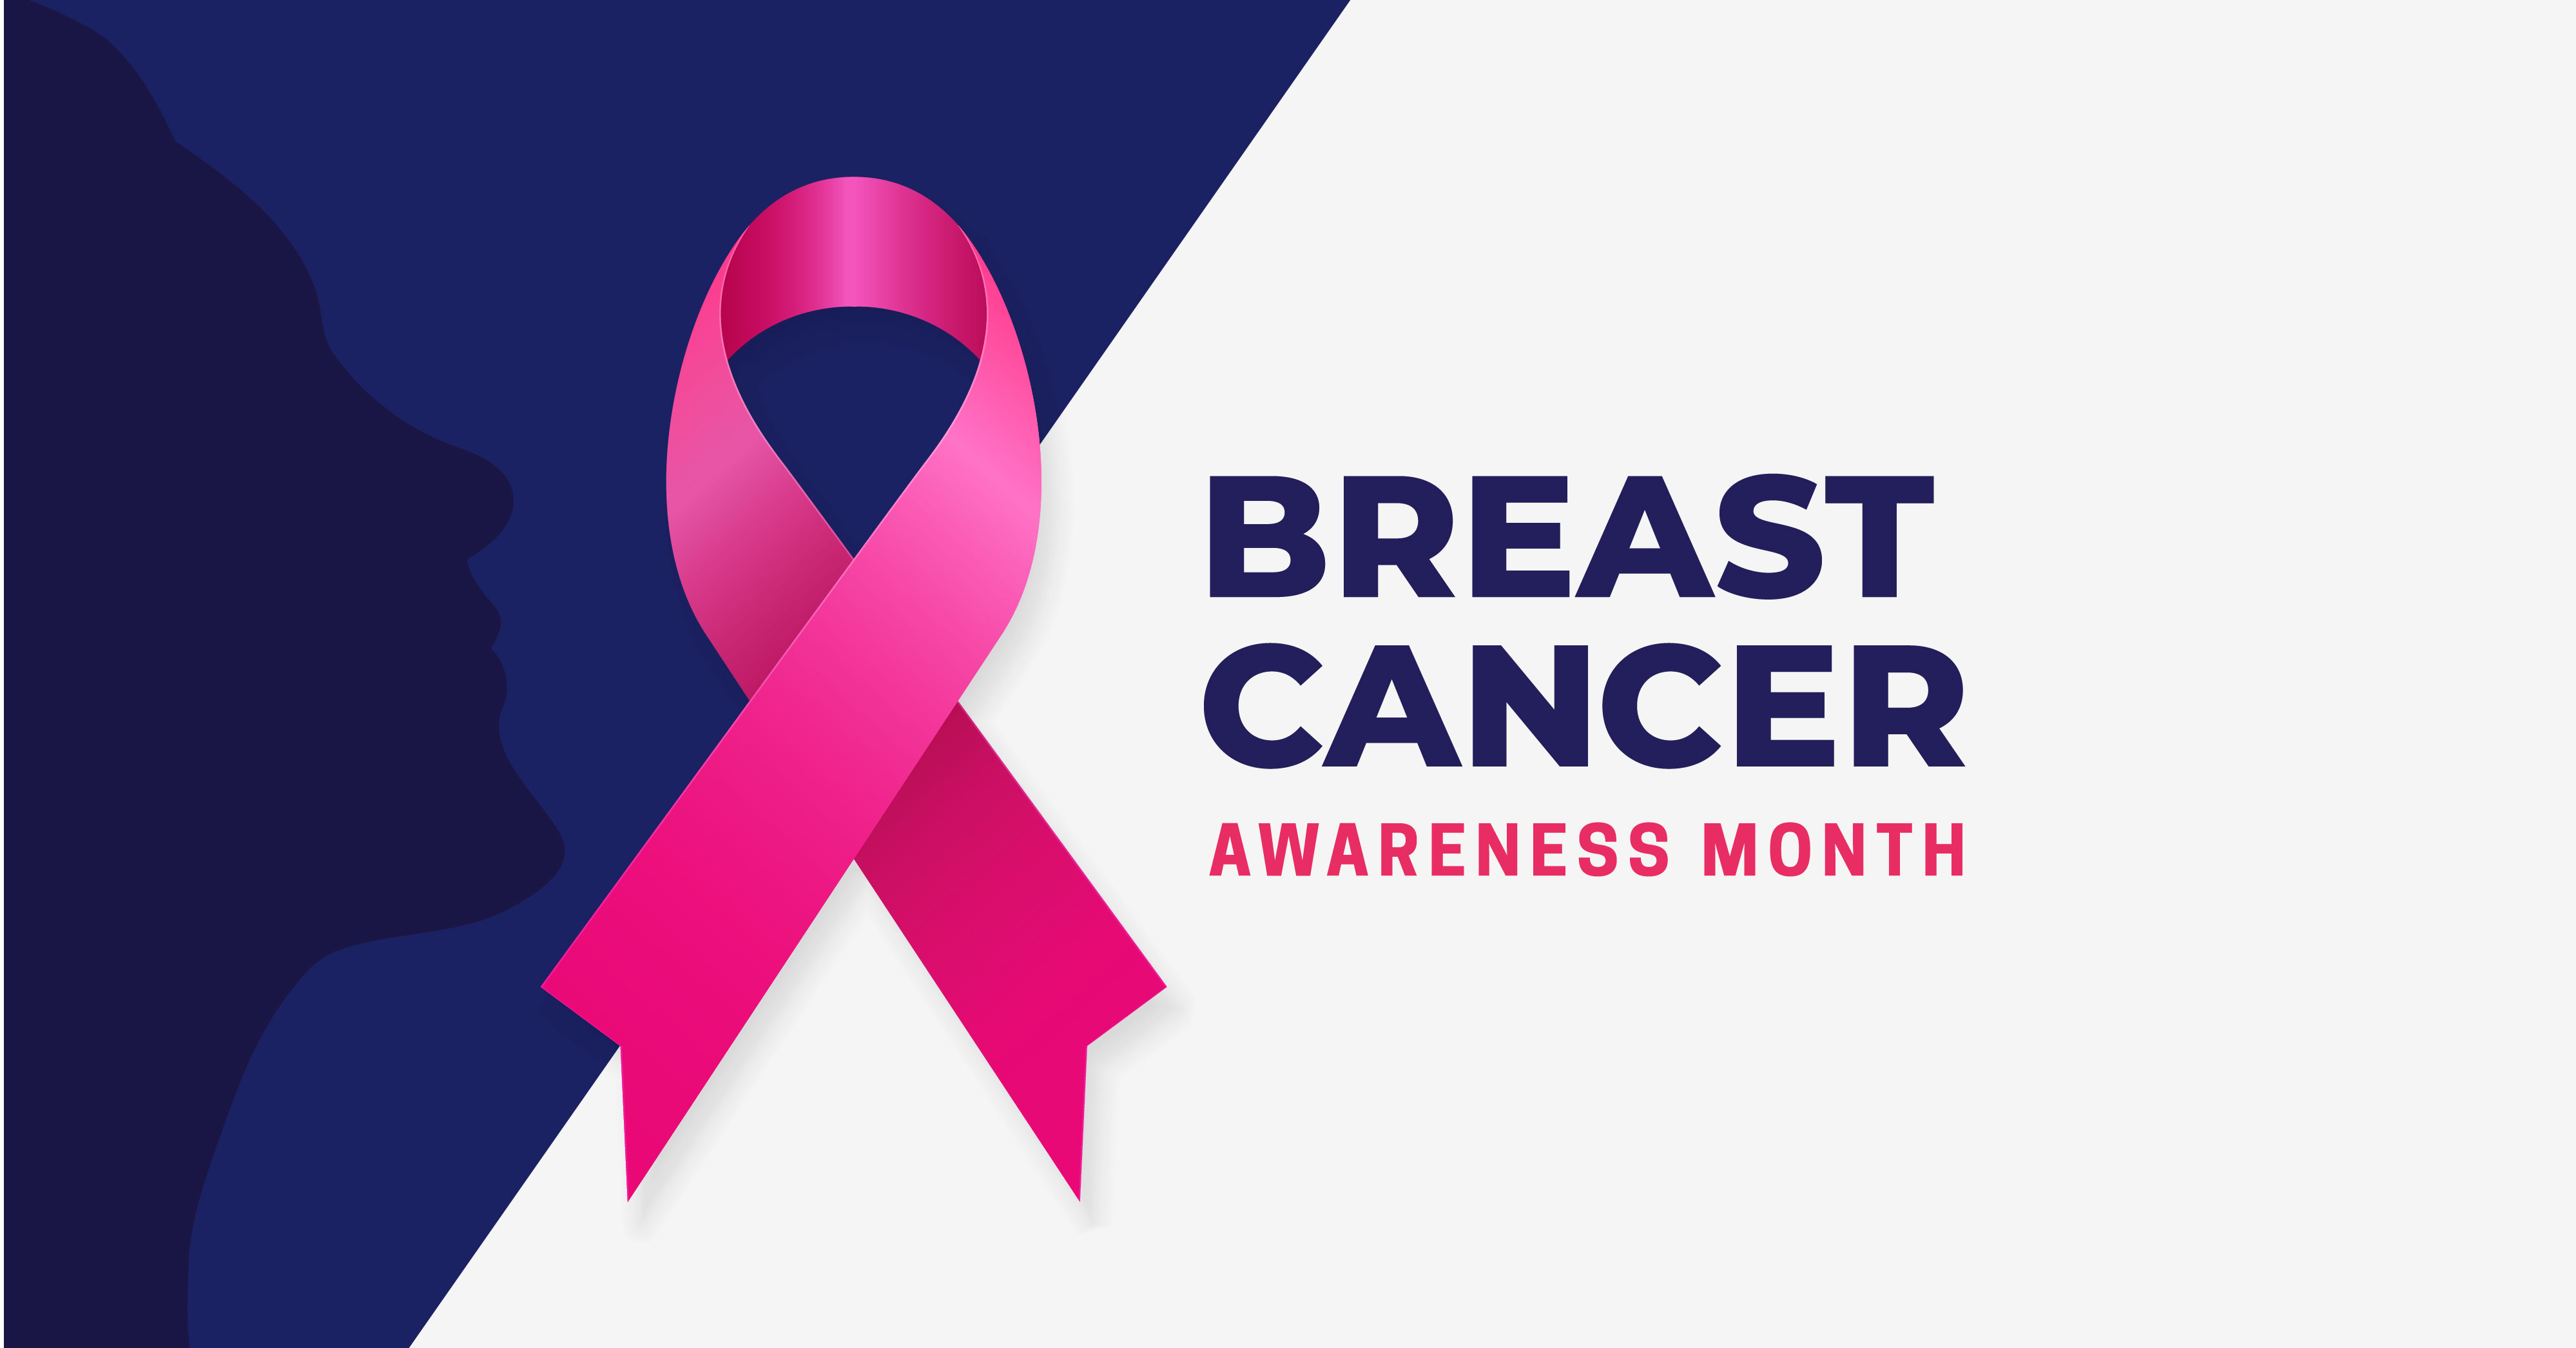 Breast Cancer Awareness Month: Celebrate Your Body